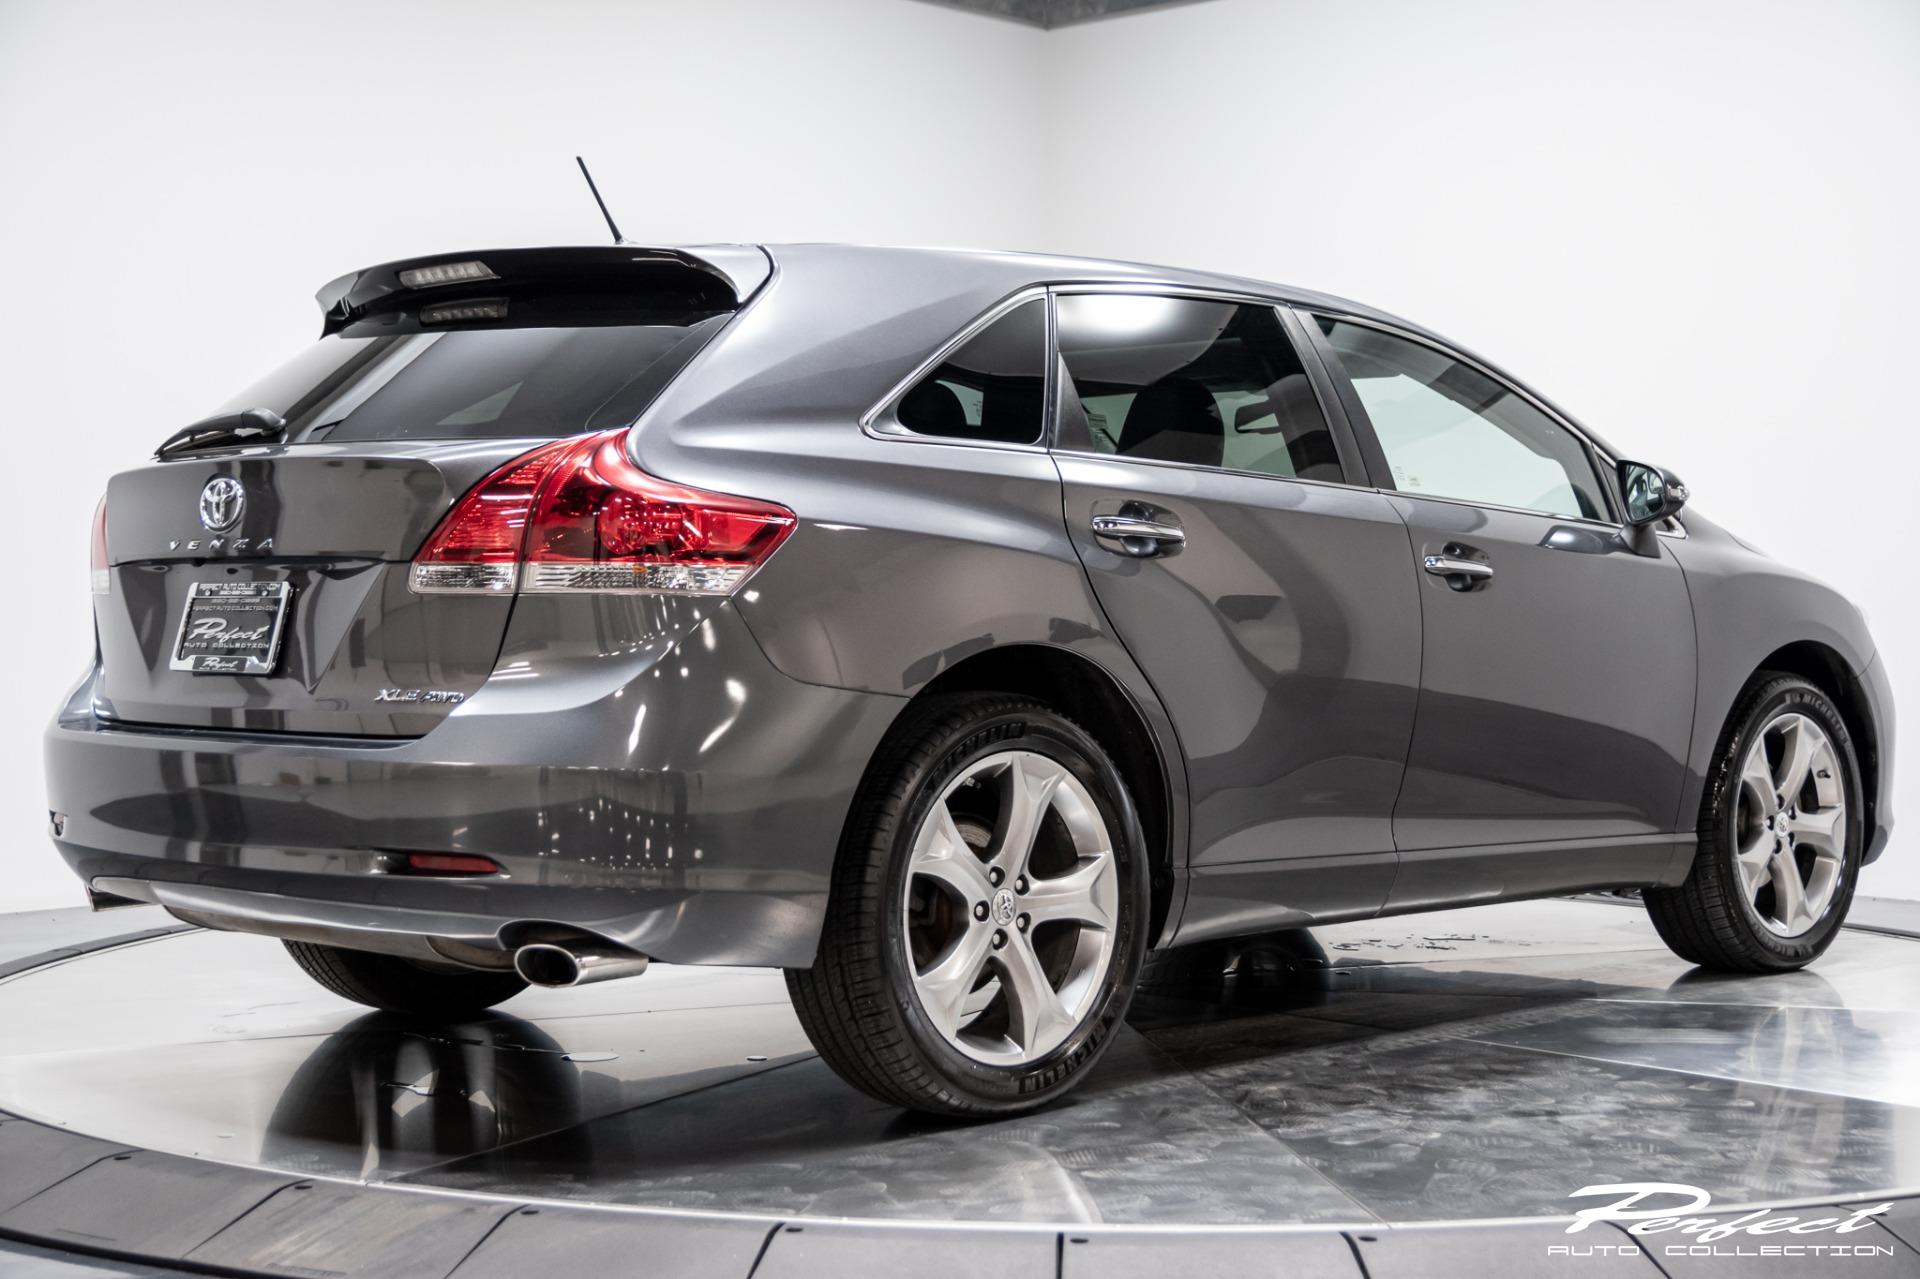 Used 2015 Toyota Venza XLE For Sale ($15,293) | Perfect Auto Collection ...